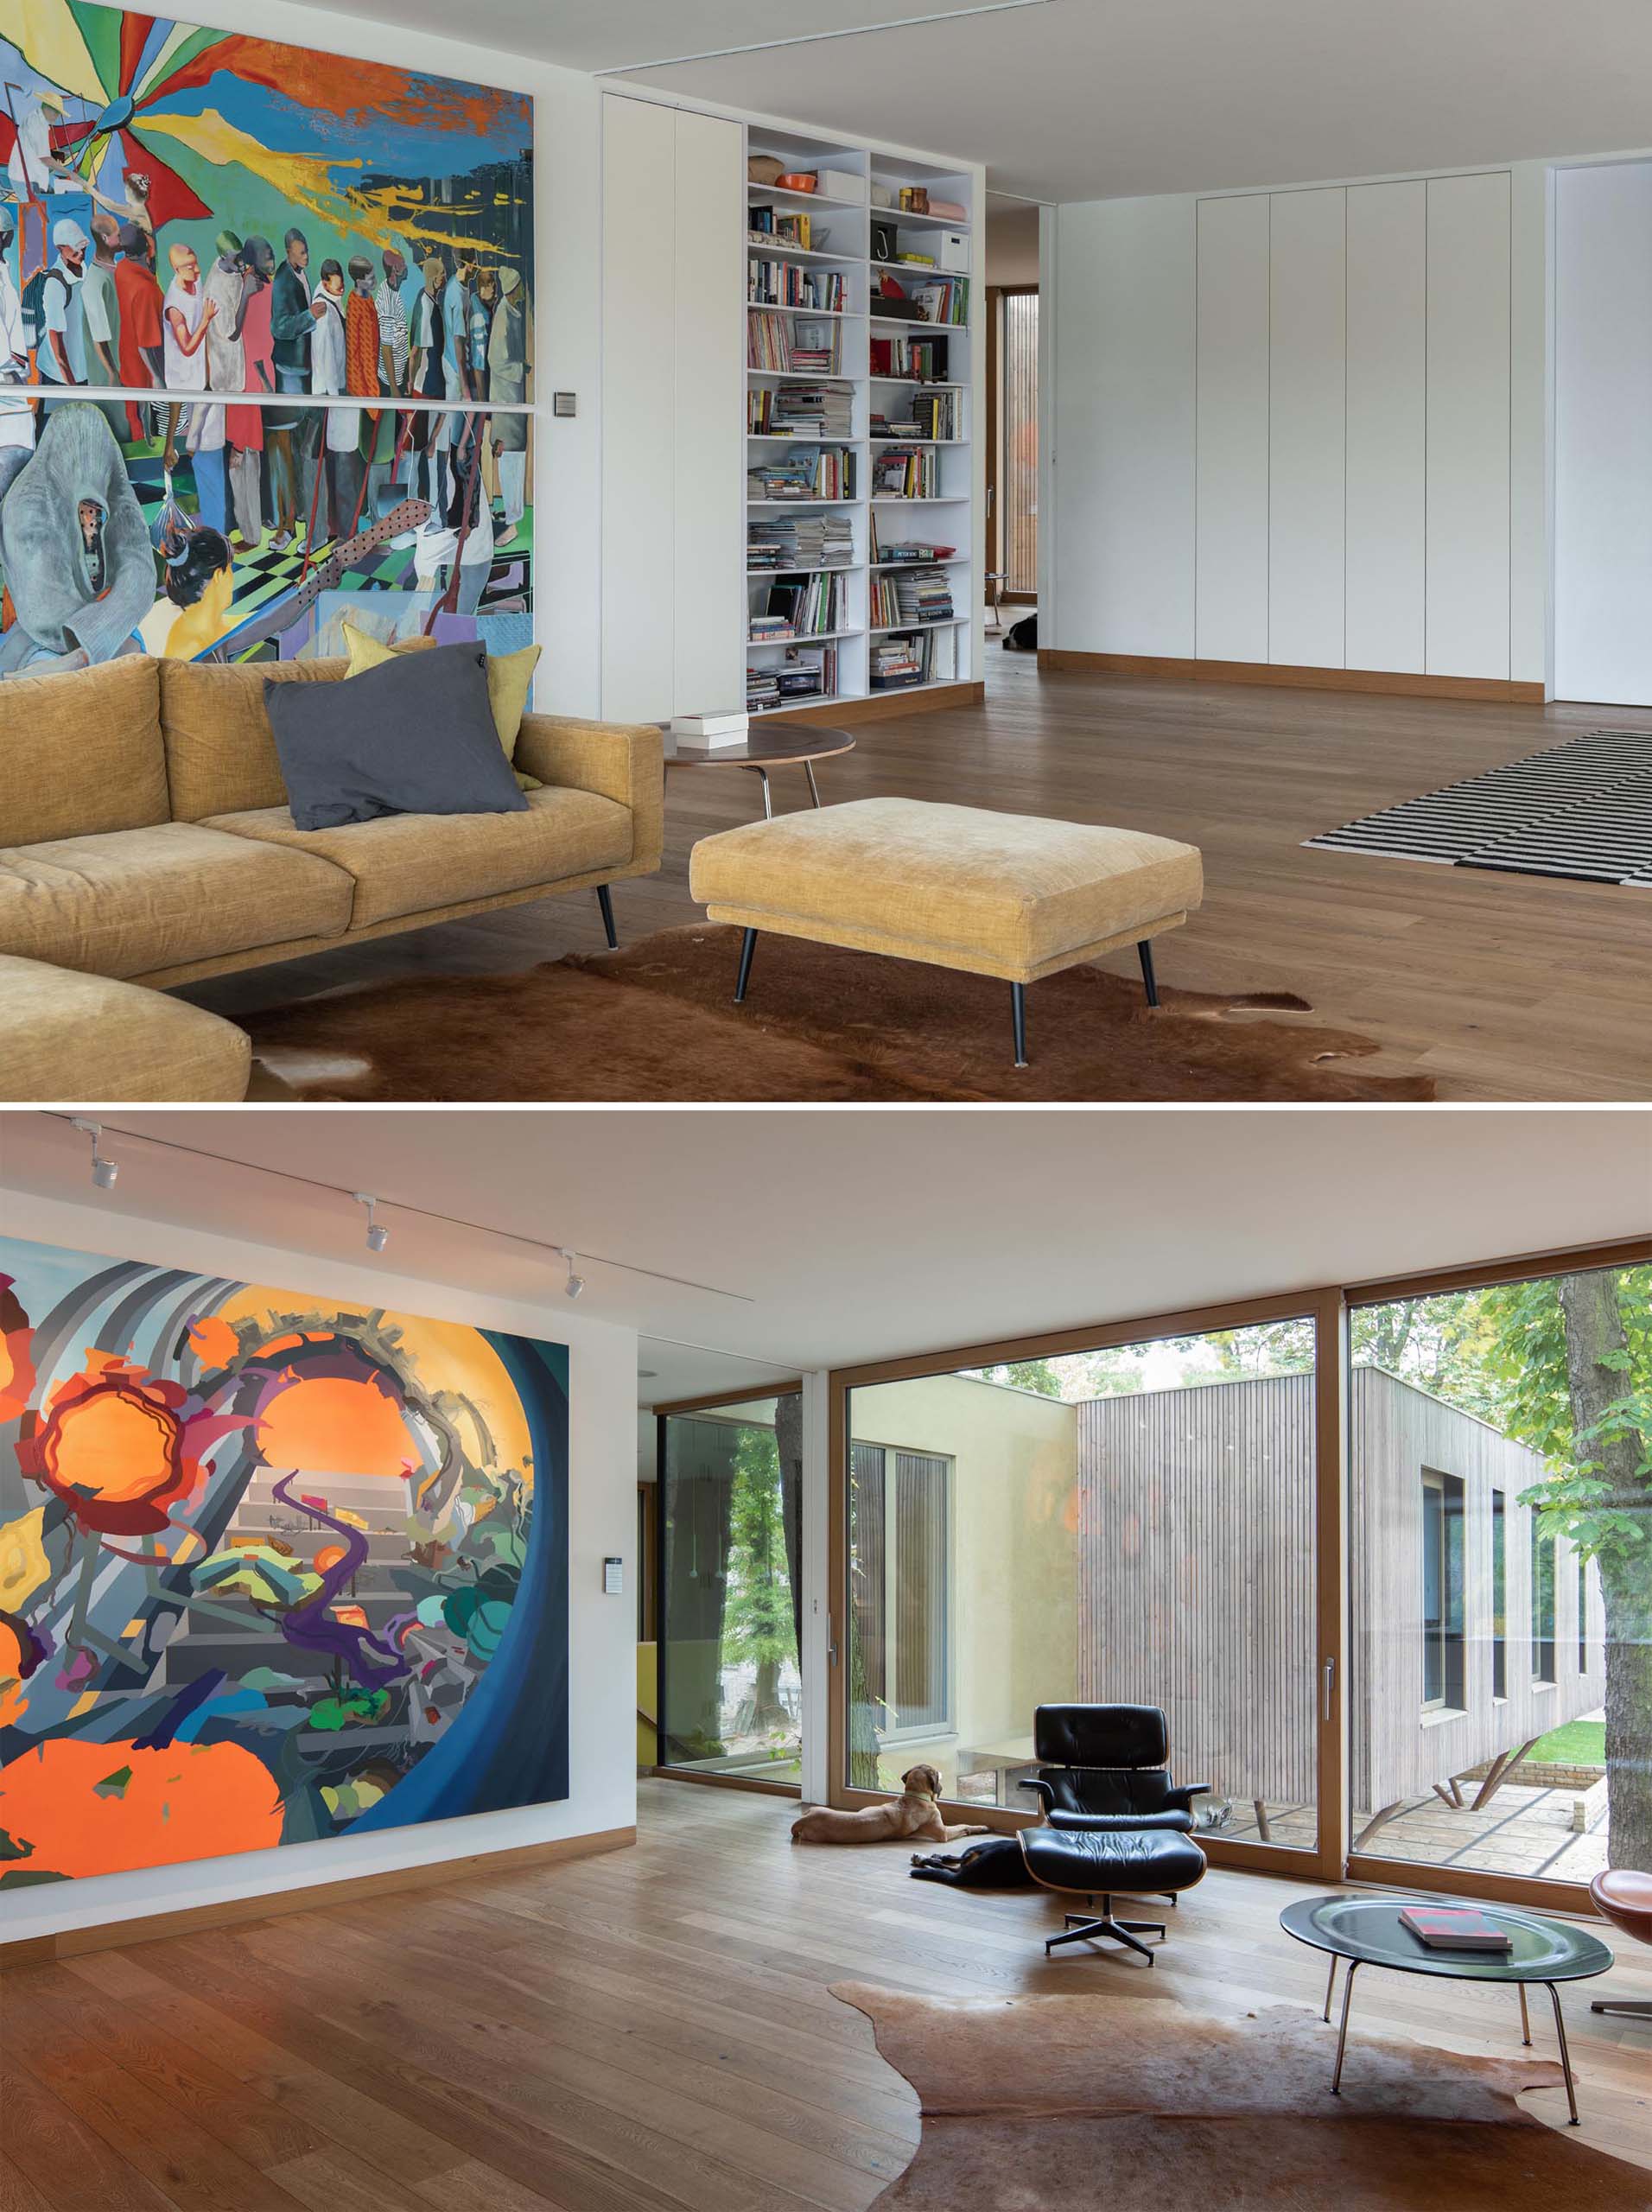 A modern living room with large and colorful artwork.